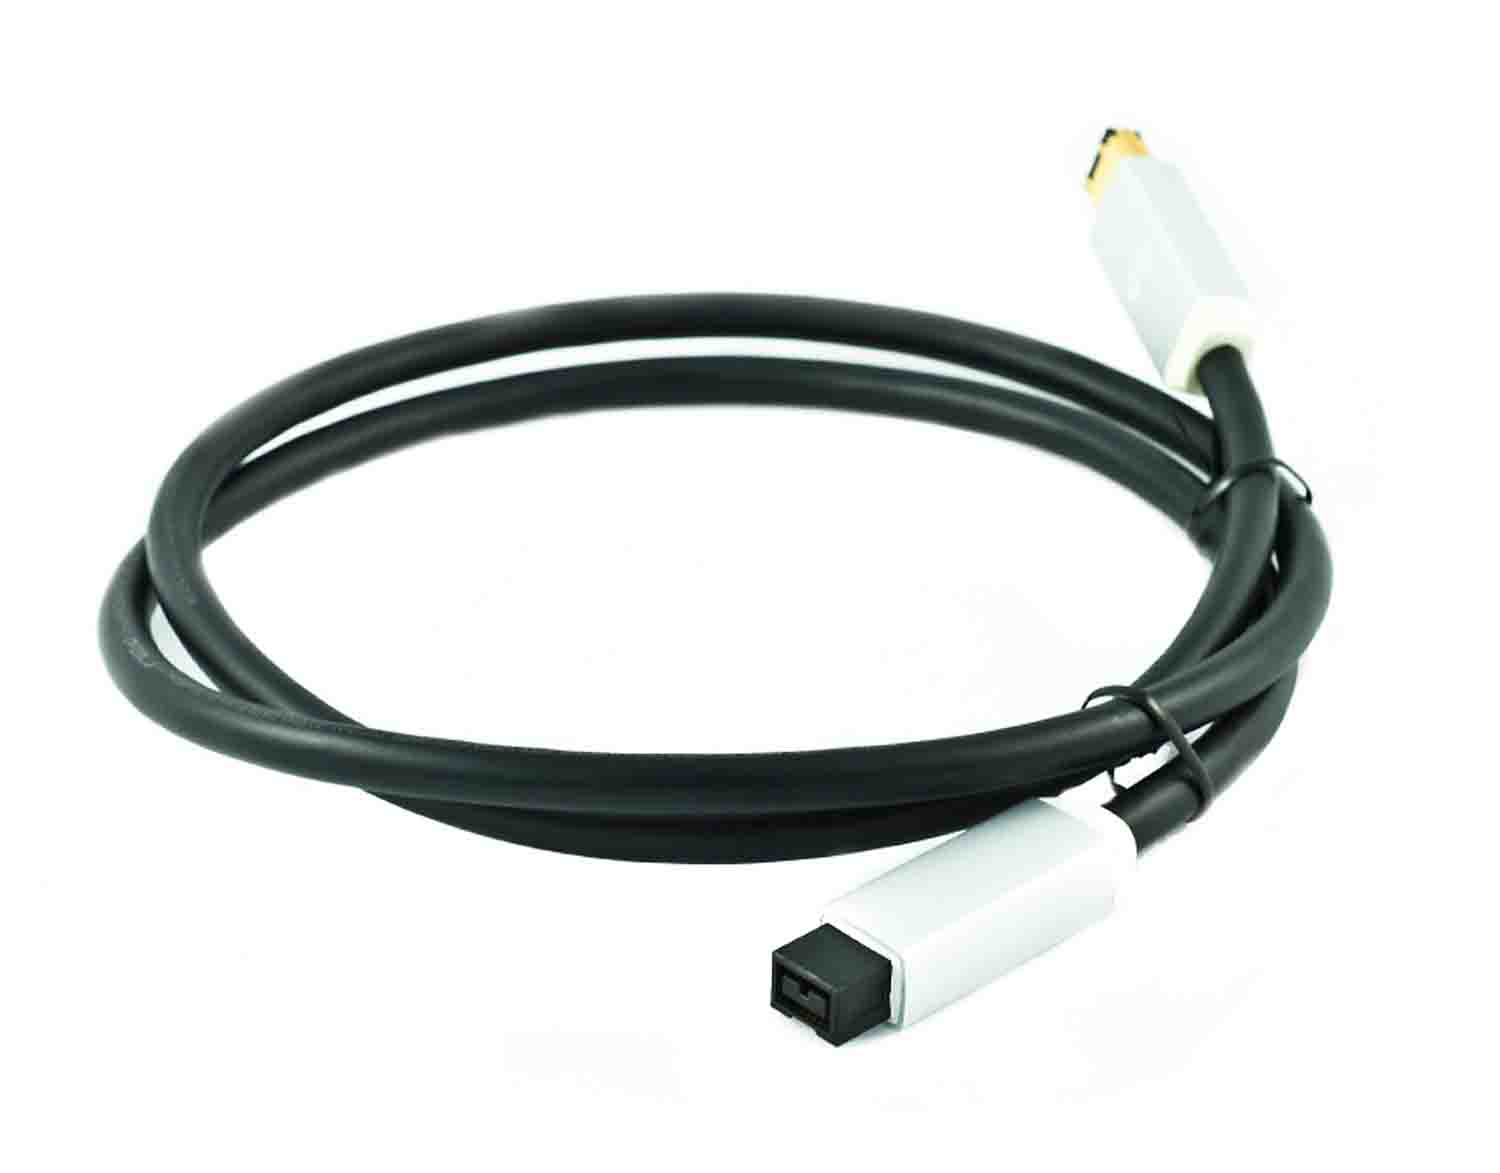 Oyaide Neo d+ Series Firewire Cable 6pin to 9pin - 1M - Hollywood DJ